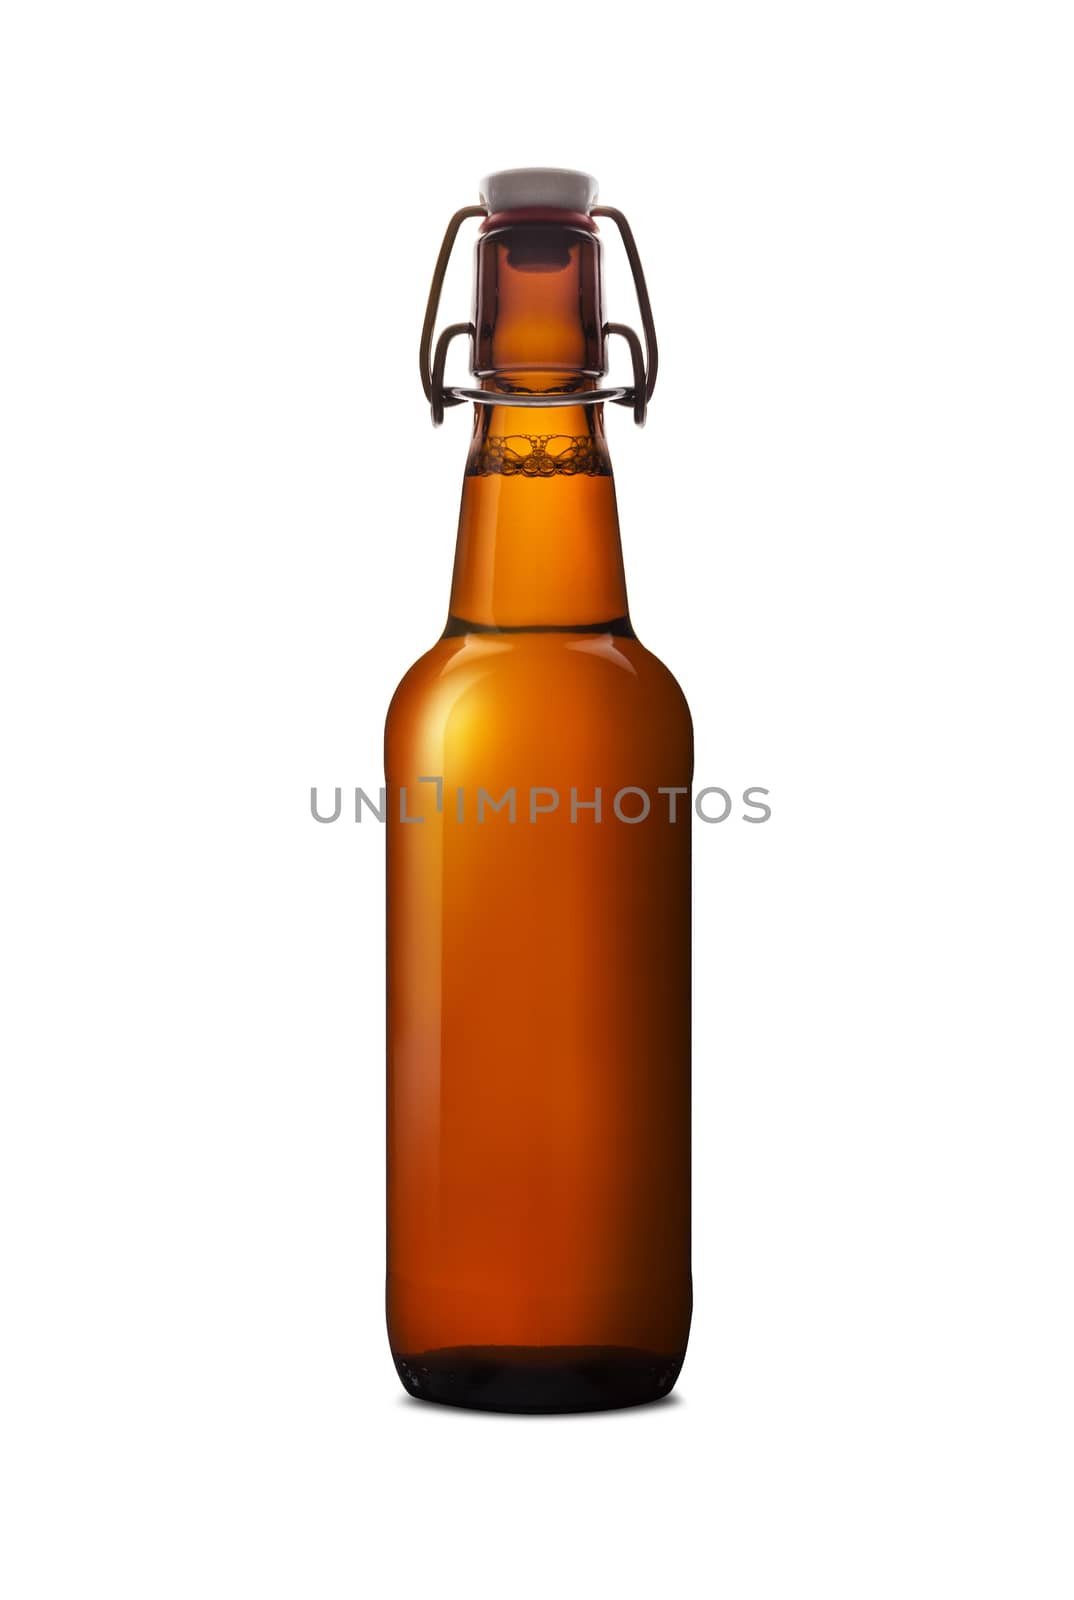 Old brown bottle of beer isolated on white background by SlayCer